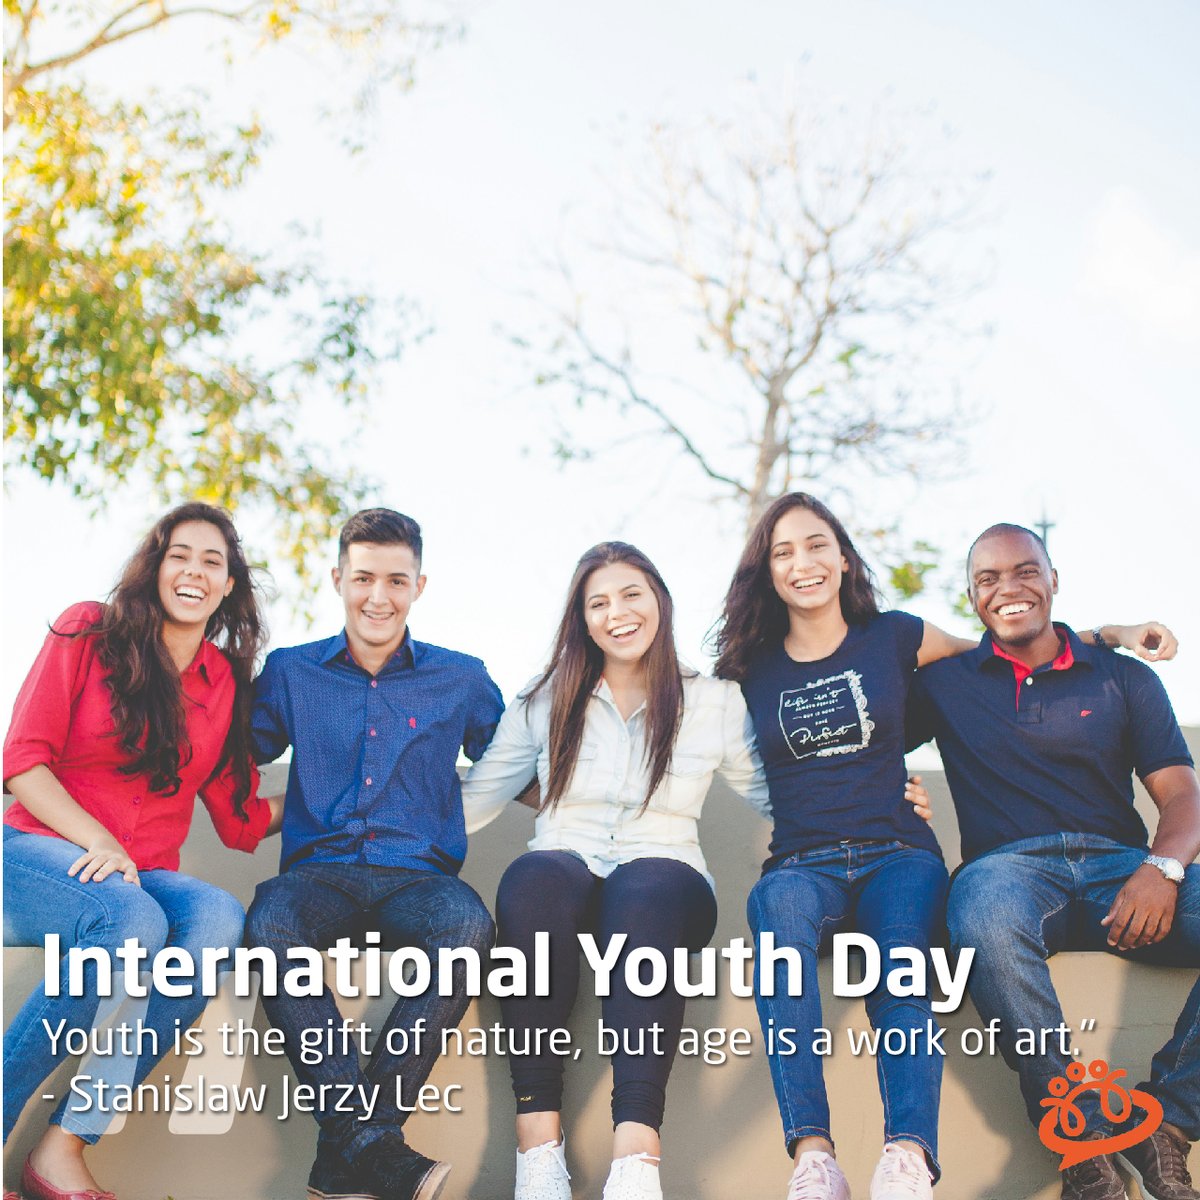 Happy Youth Day! Today, we celebrate the energy, creativity, and potential of young people worldwide. Your voices matter, your ideas inspire change, and your actions shape the future. Let's empower and invest in our youth, for they are the leaders of tomorrow. #YouthDay2024